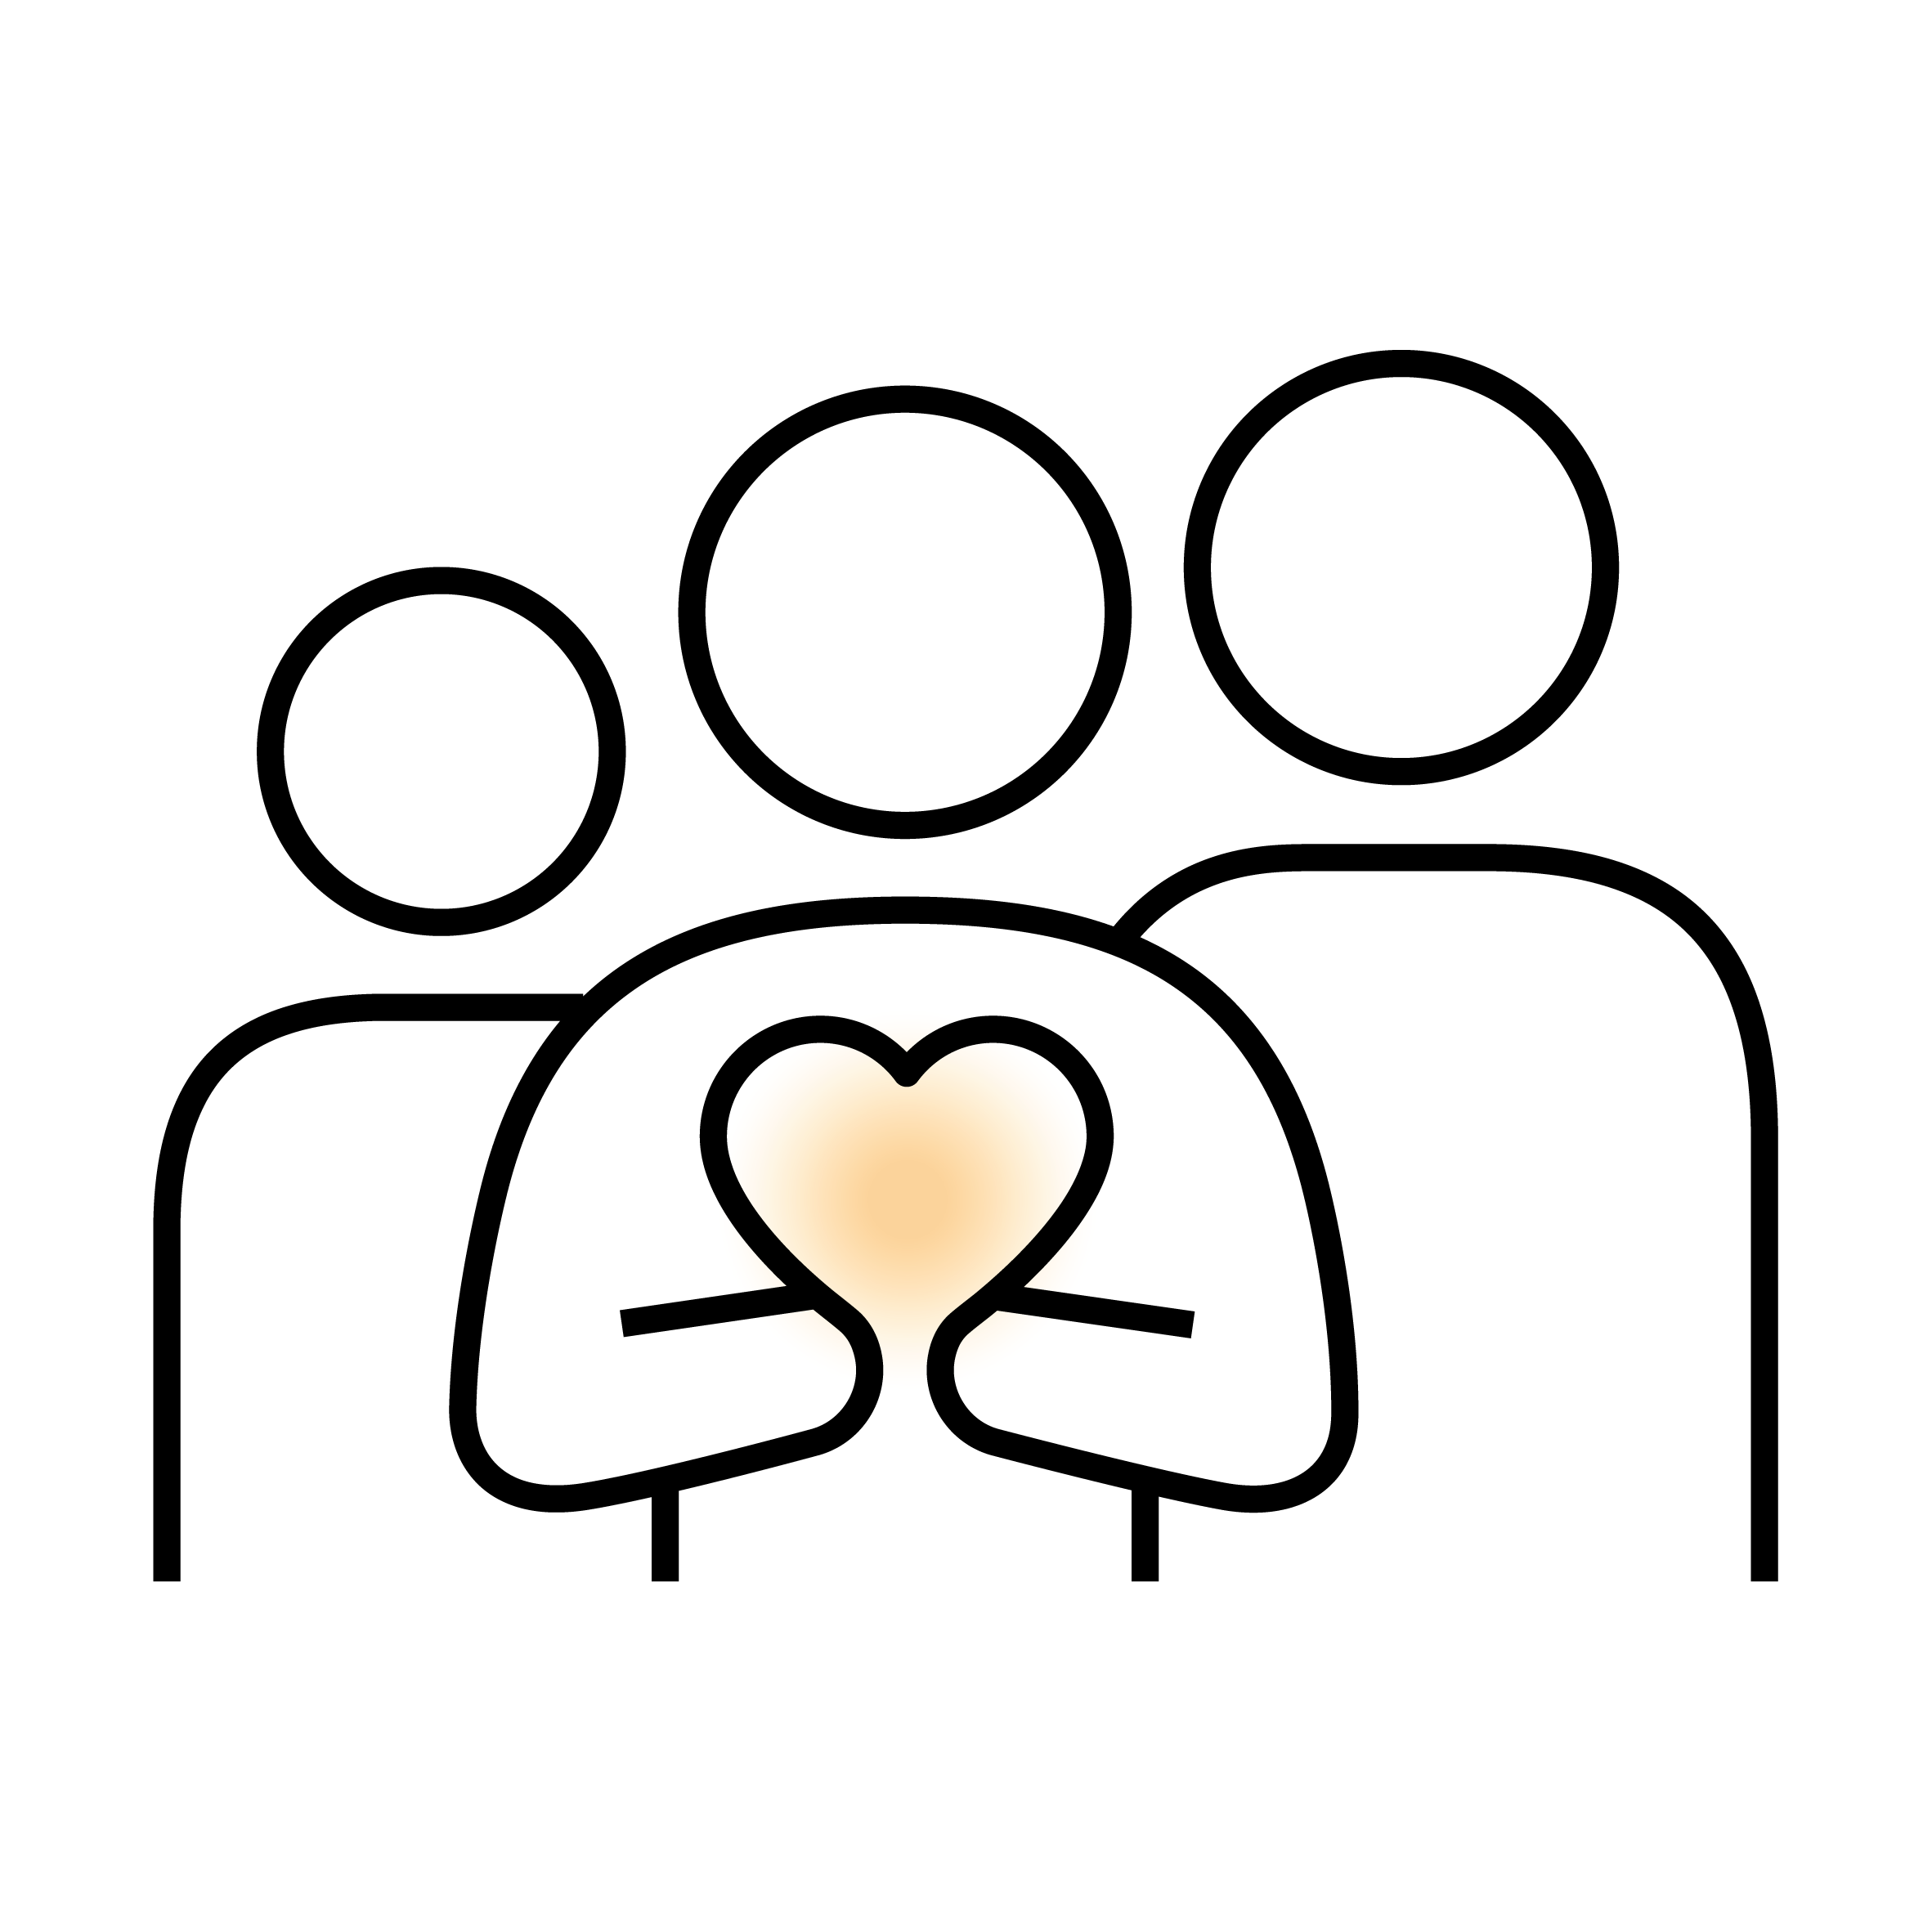 Icon of a family with love, consisting of one adult and two children.